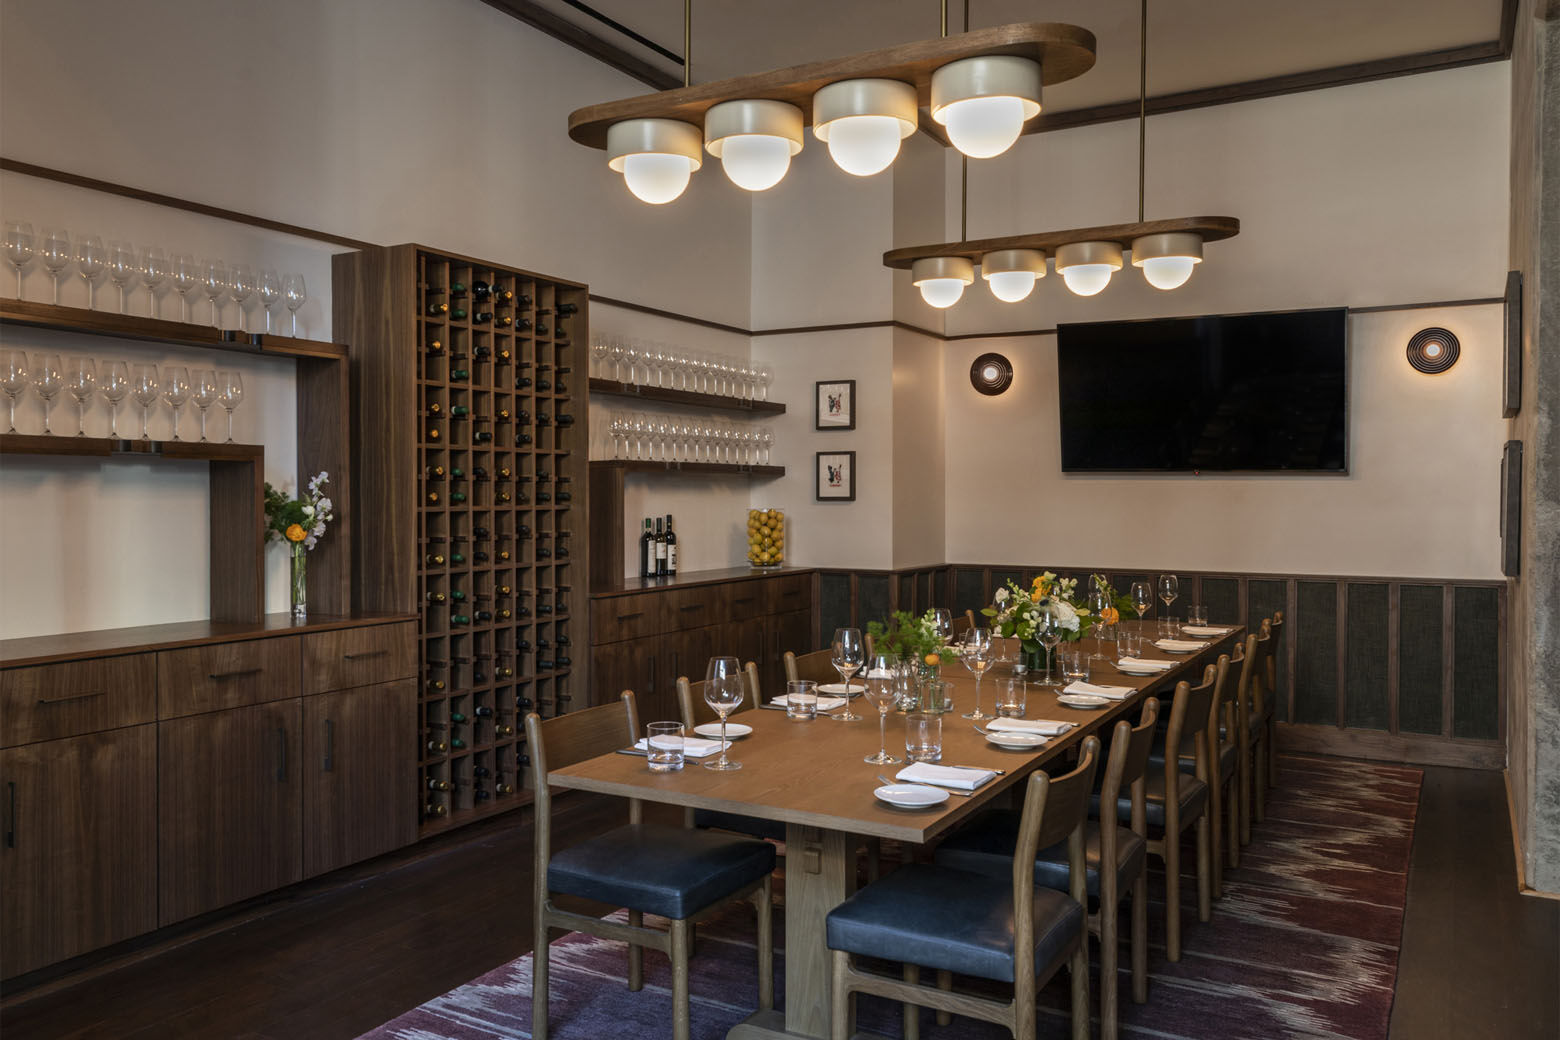 Maialino Mare is the D.C. outpost of the original Maialino Mare restaurant from restaurater Danny Meyer's Union Square Hospitality Group, which anchors the Grammercy Park Hotel in Manhattan.